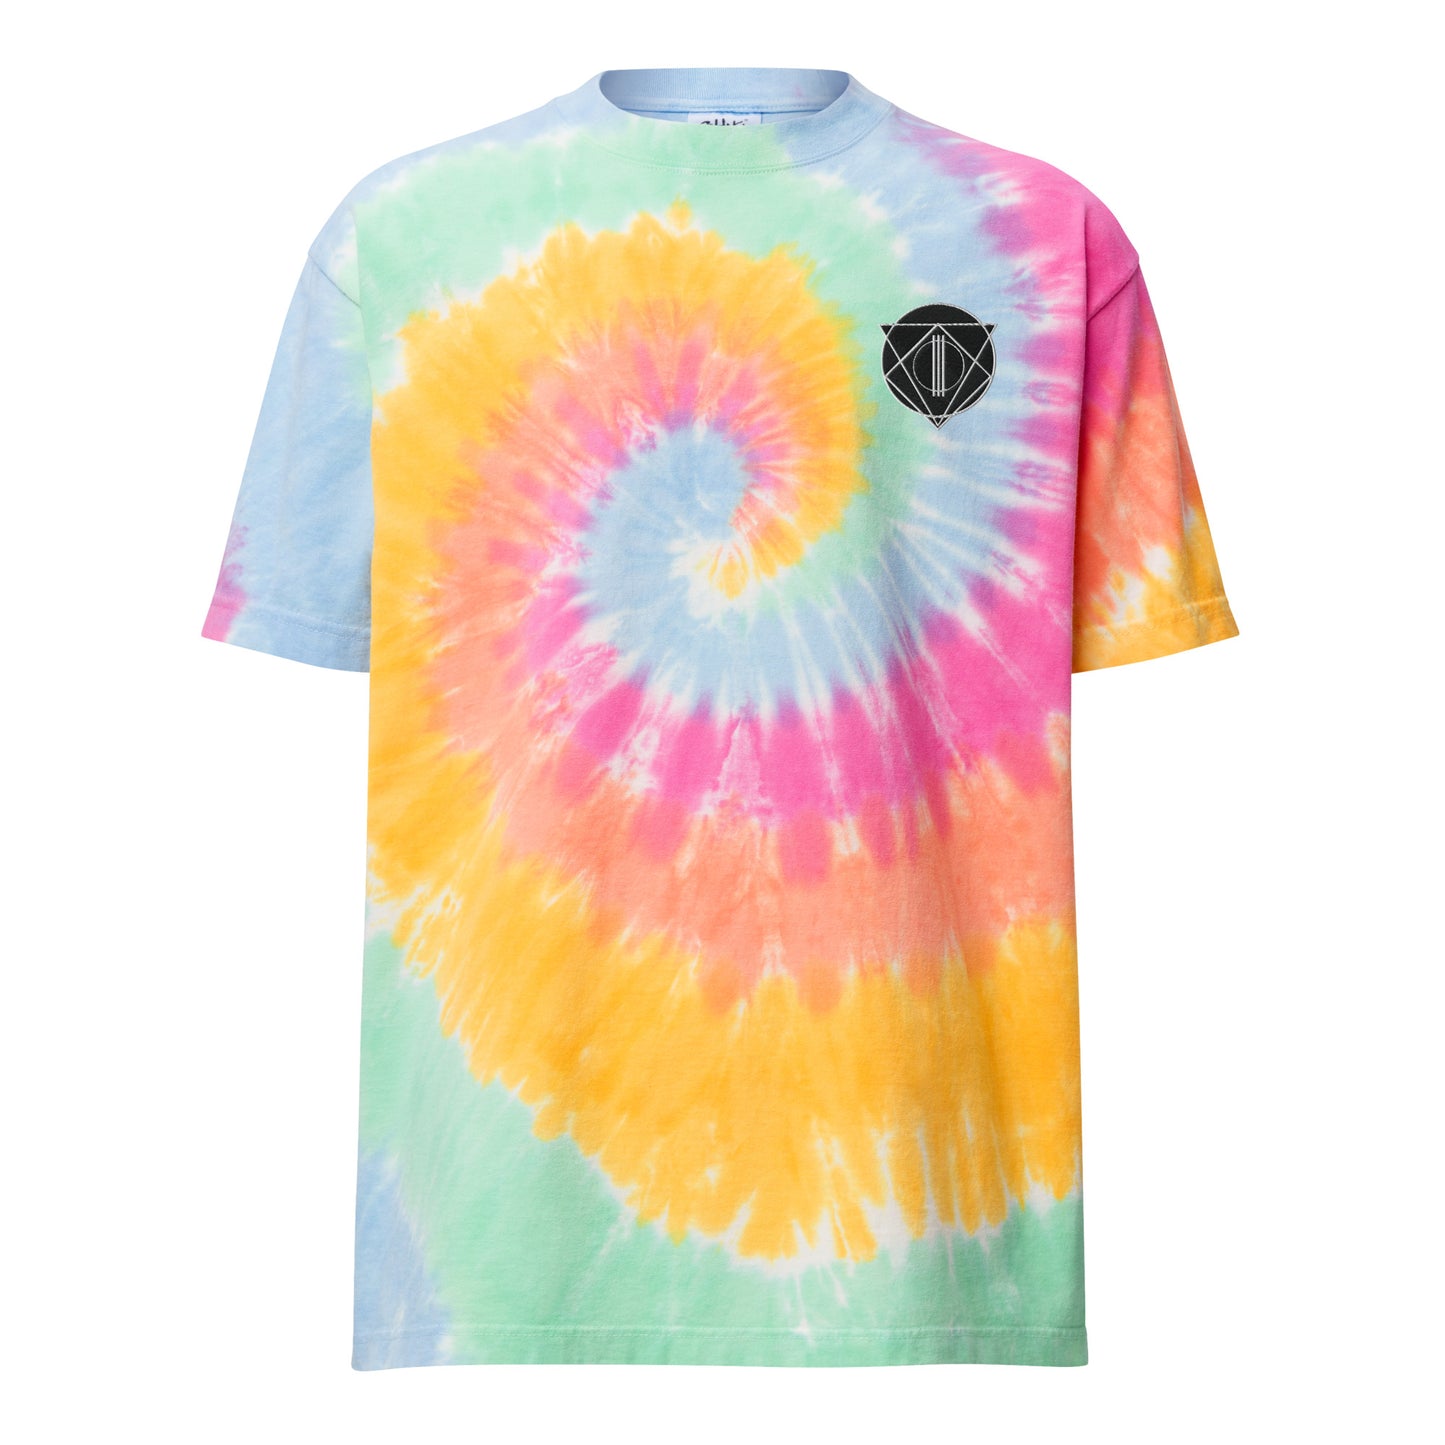 Now That I Have Your Attention - Oversized tie-dye t-shirt